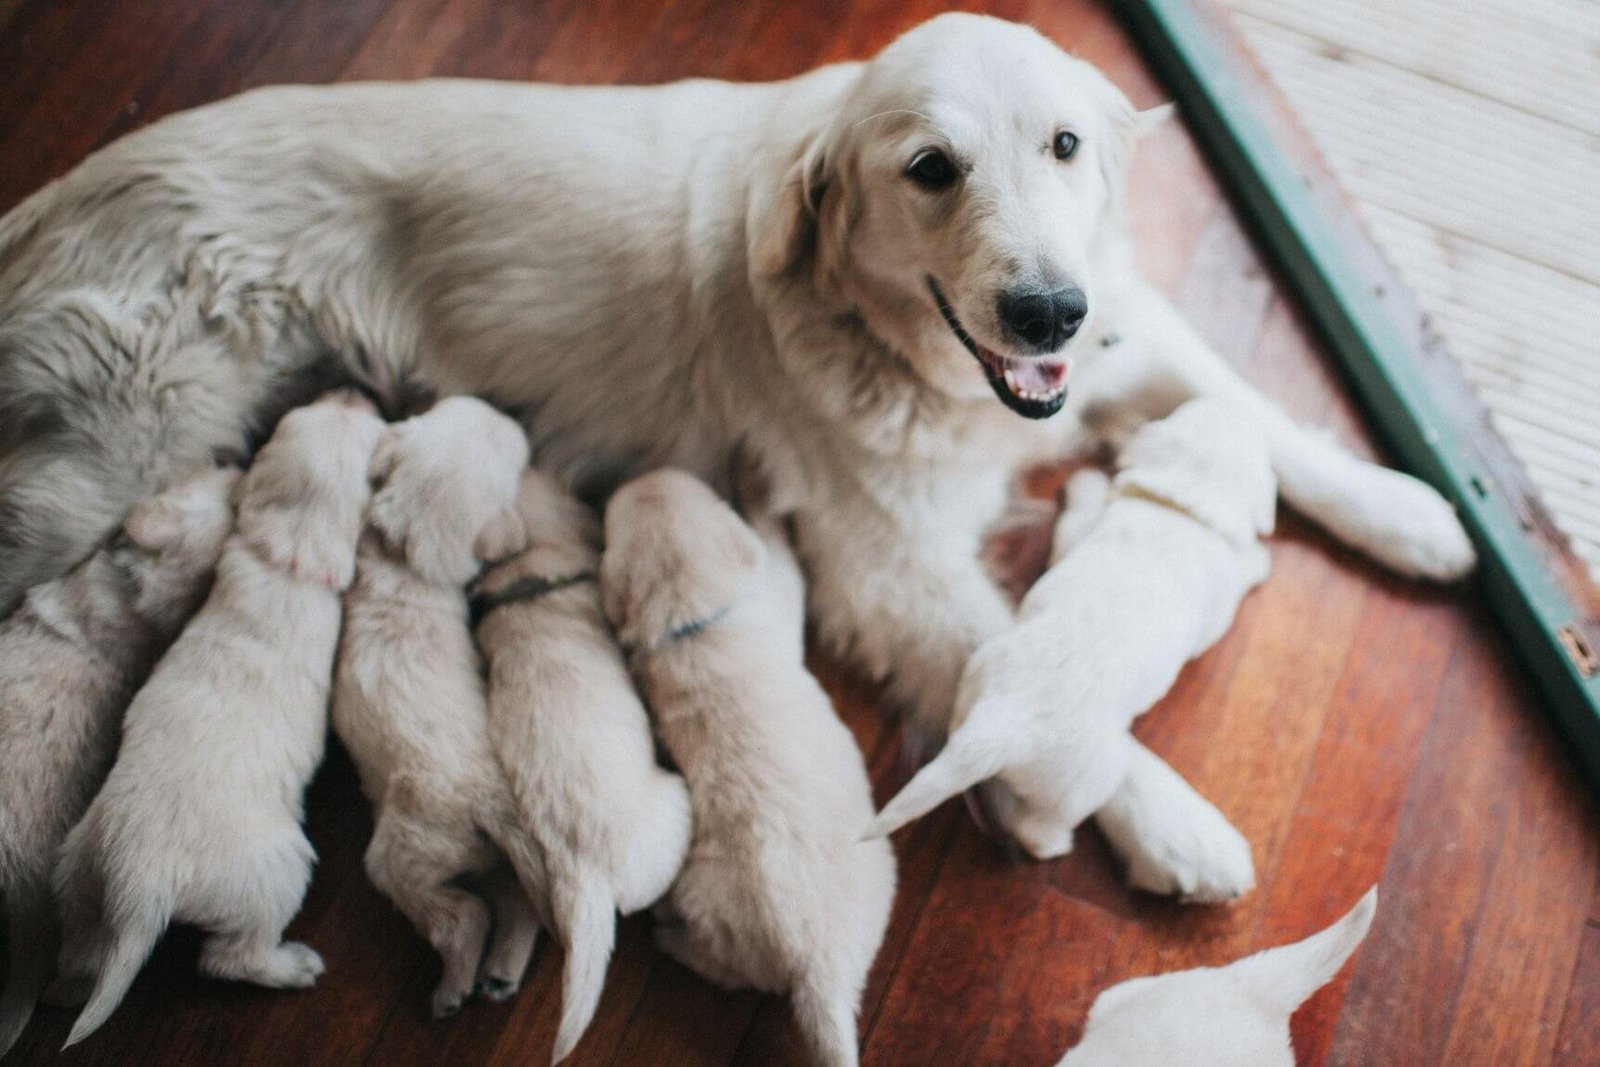 Education on the birthing process of dogs